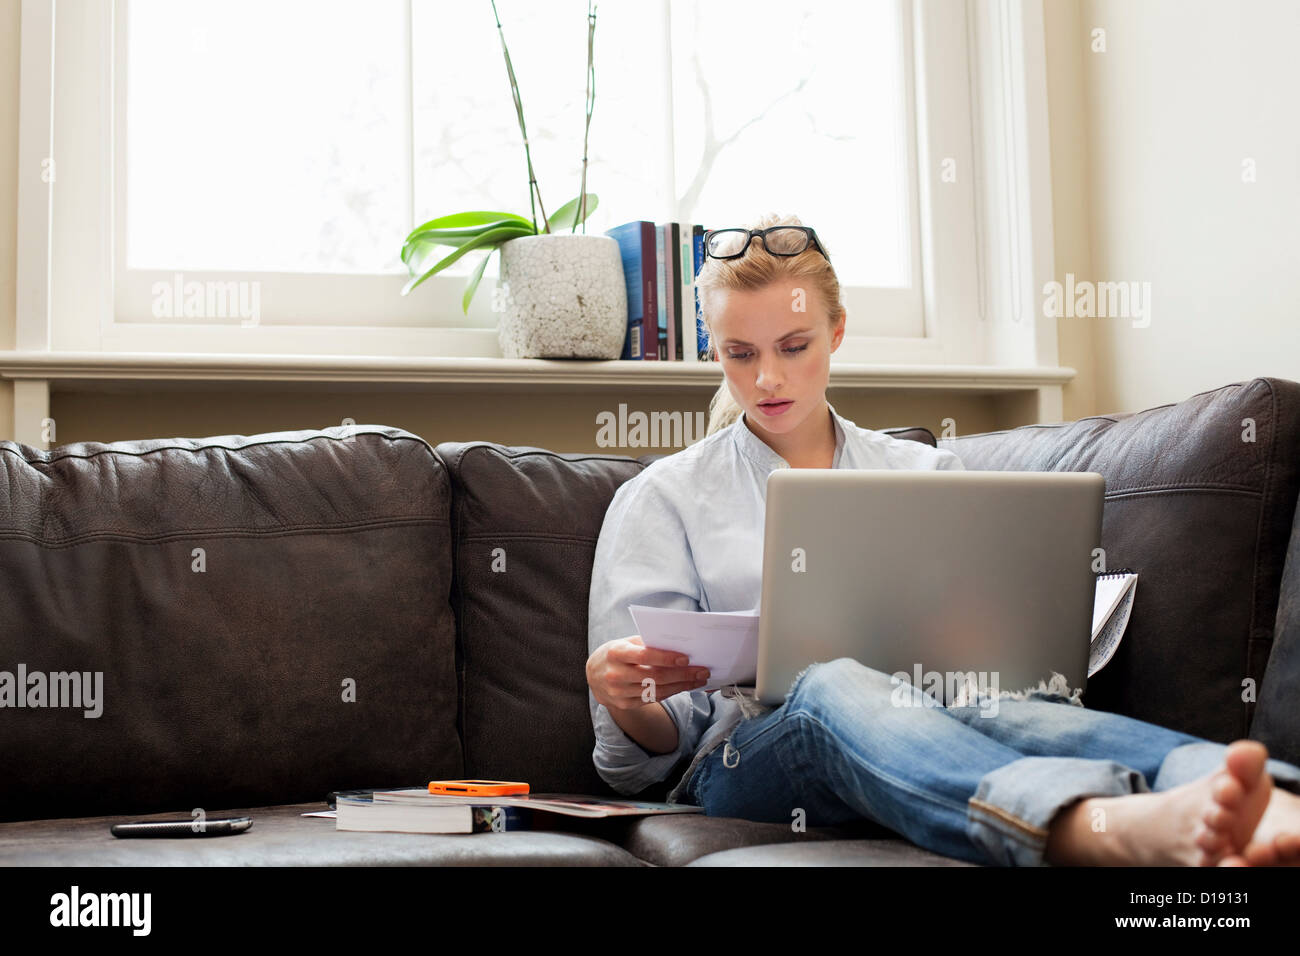 Young woman sitting on sofa with laptop and papers Stock Photo